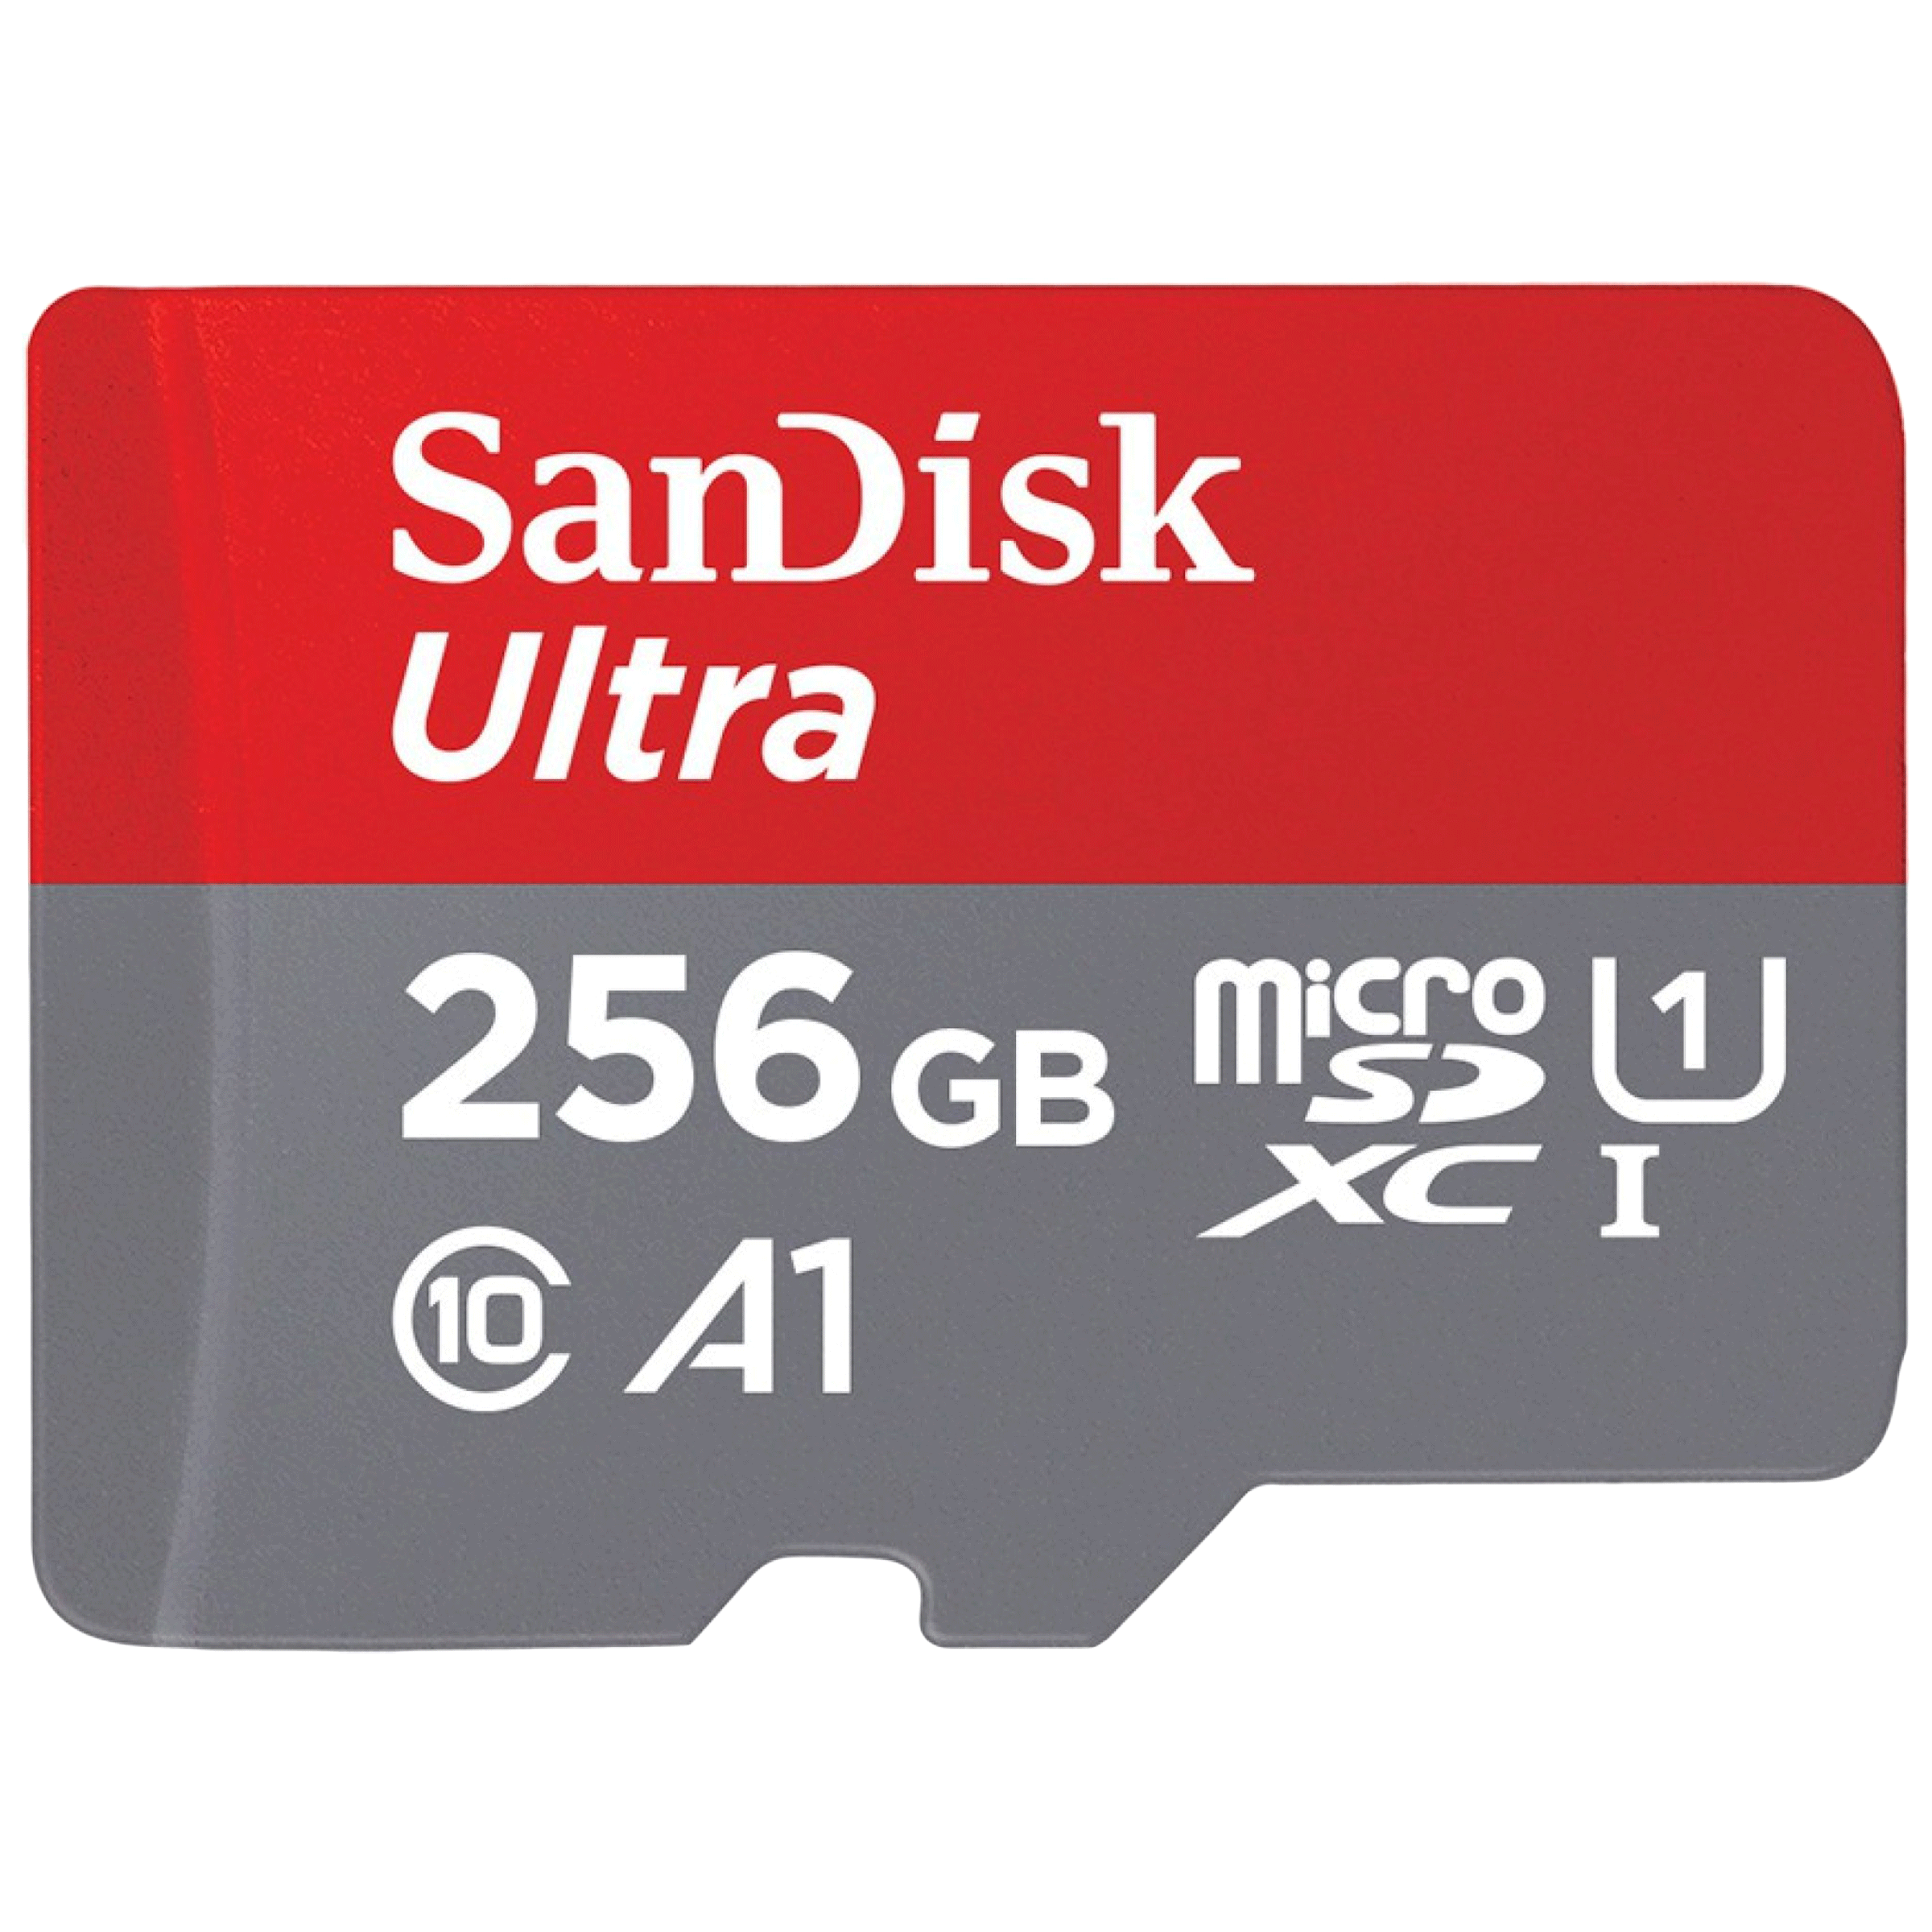 SD Card 256GB Memory Card Fast Speed Class 10 256GB Flash Memory Card for Camera,Videographers&Vloggers and Other SD Card Compatible Devices 256GB 